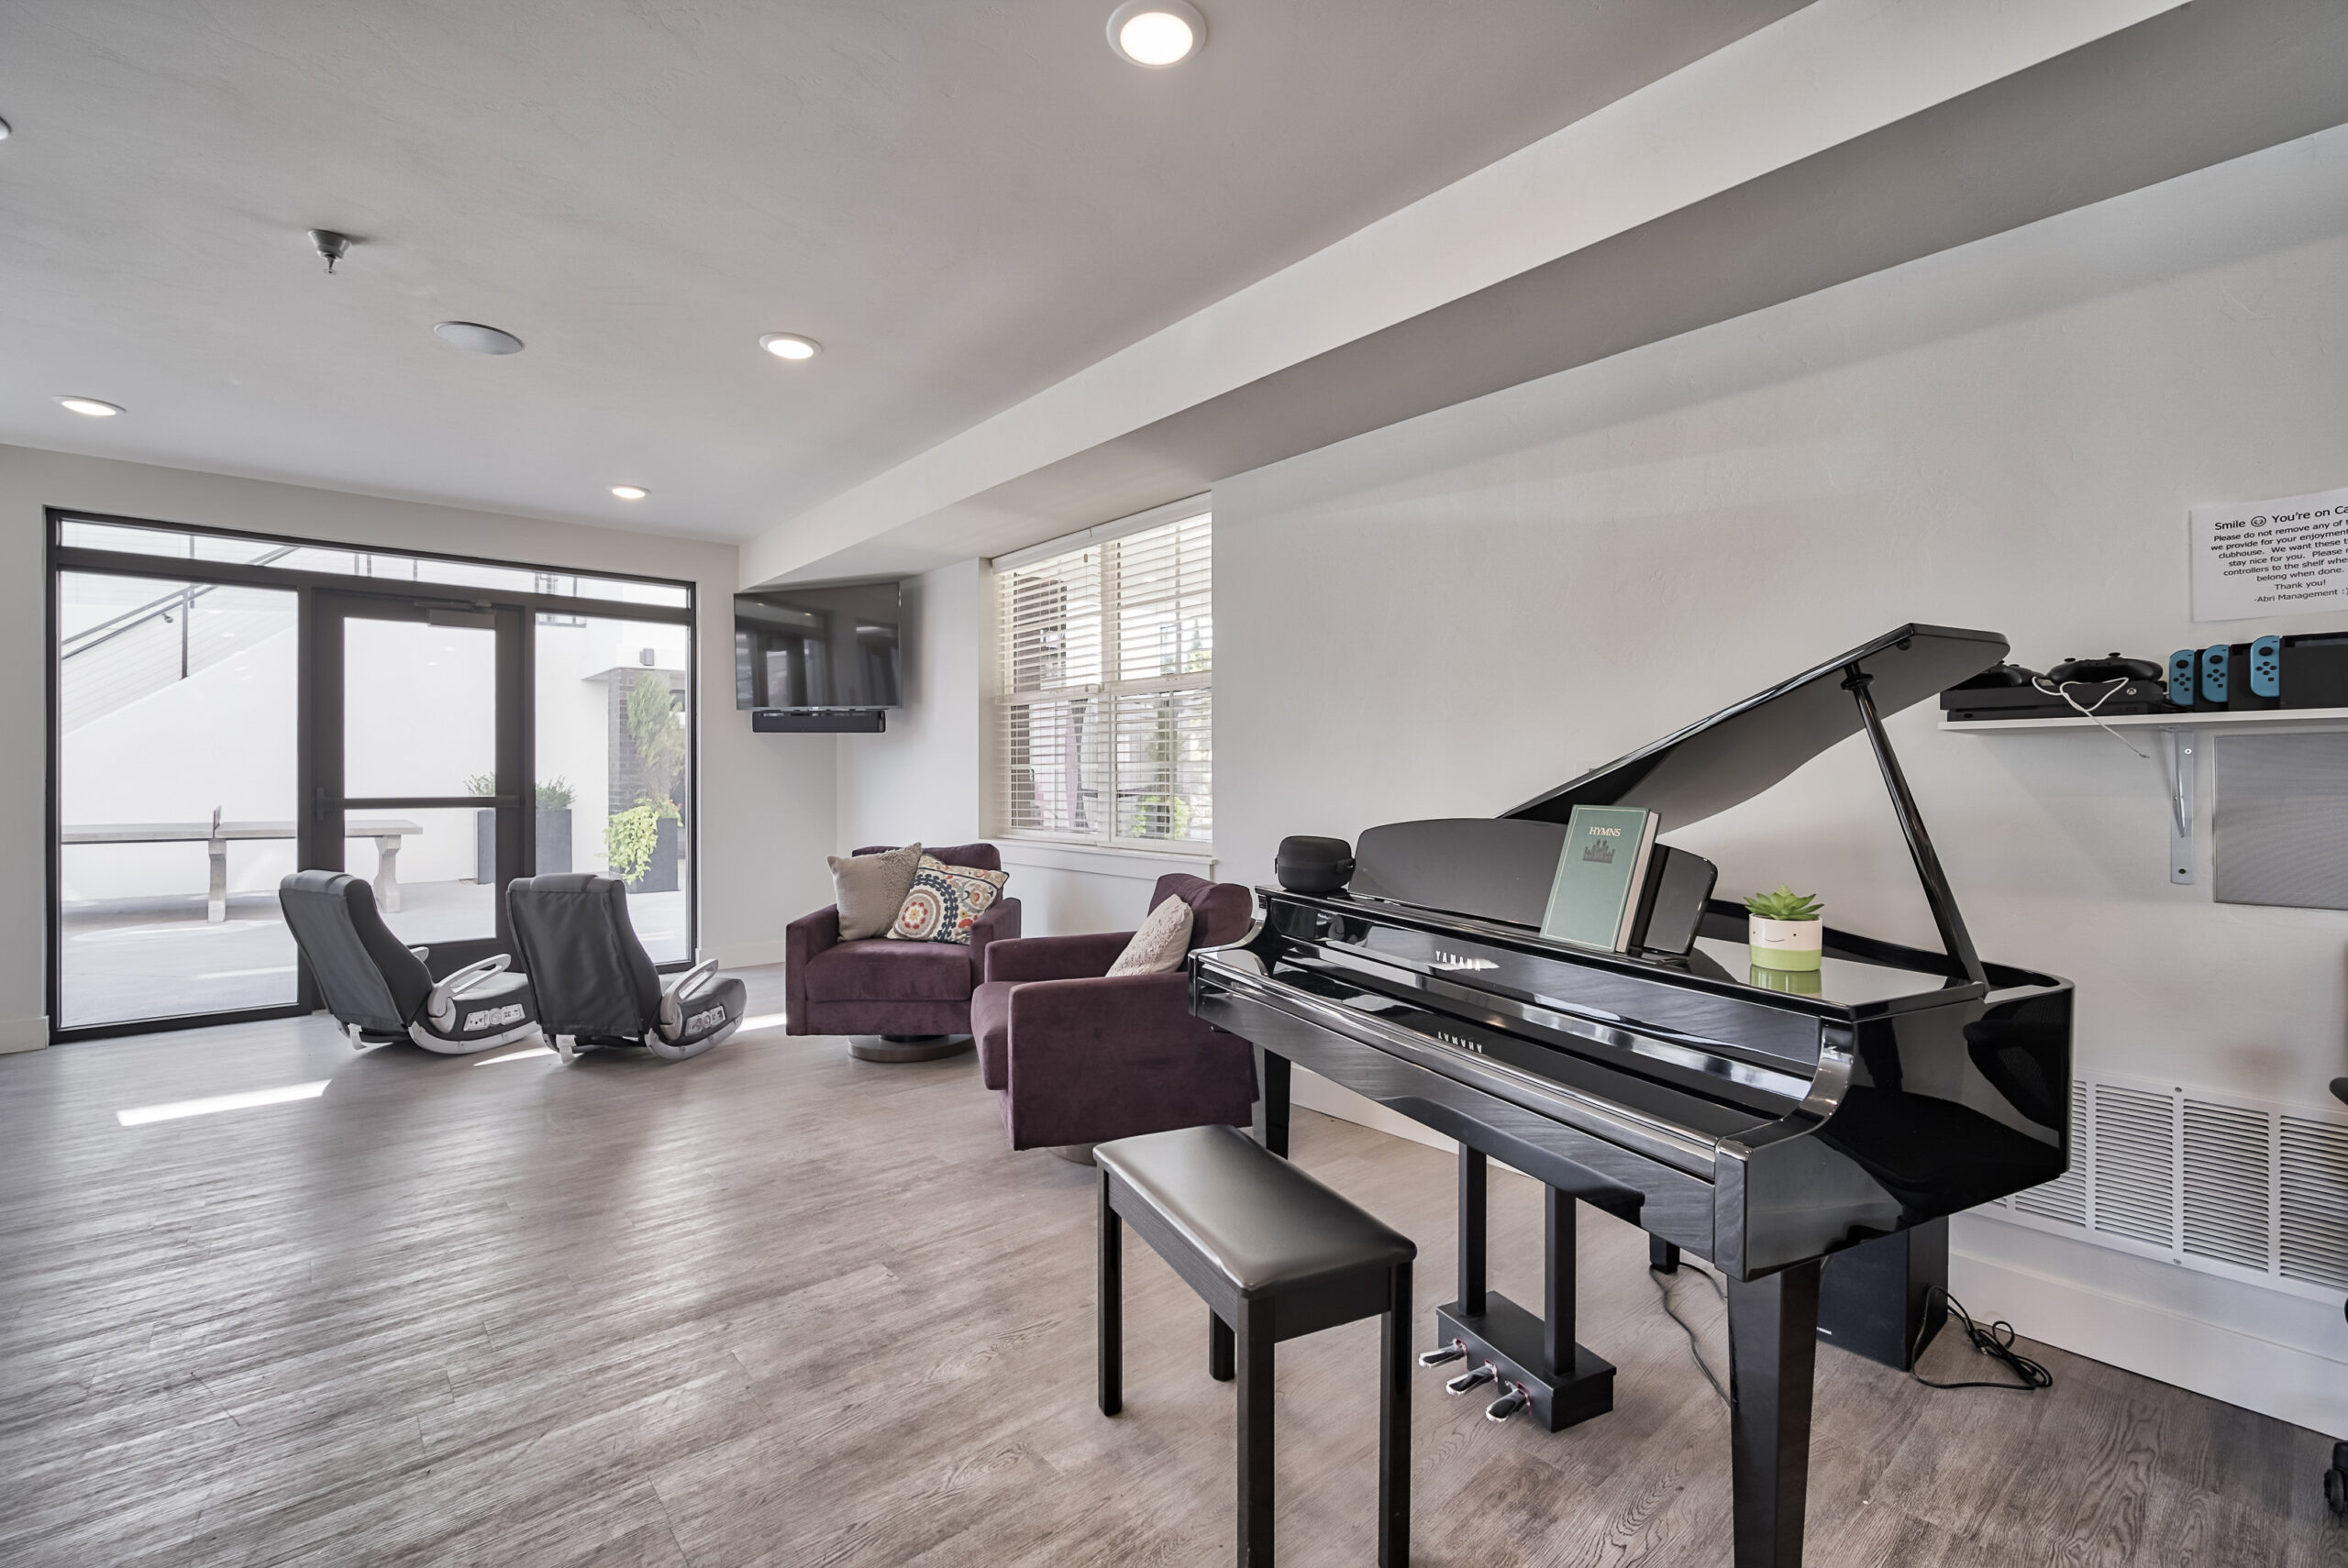 Townhome Community Piano